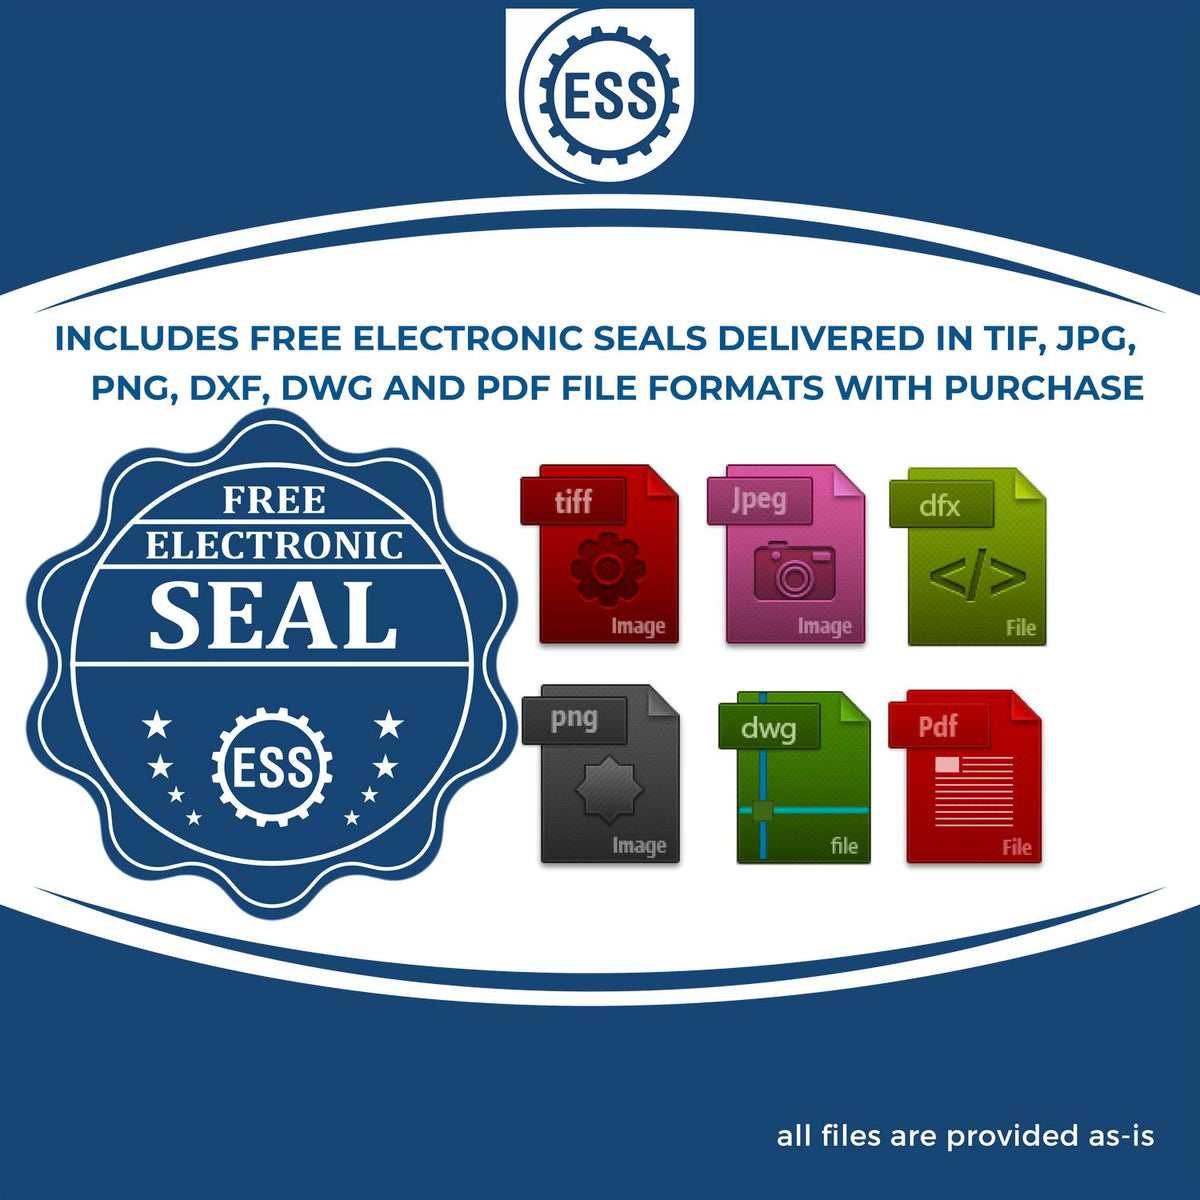 An infographic for the free electronic seal for the Self-Inking Wyoming Geologist Stamp illustrating the different file type icons such as DXF, DWG, TIF, JPG and PNG.